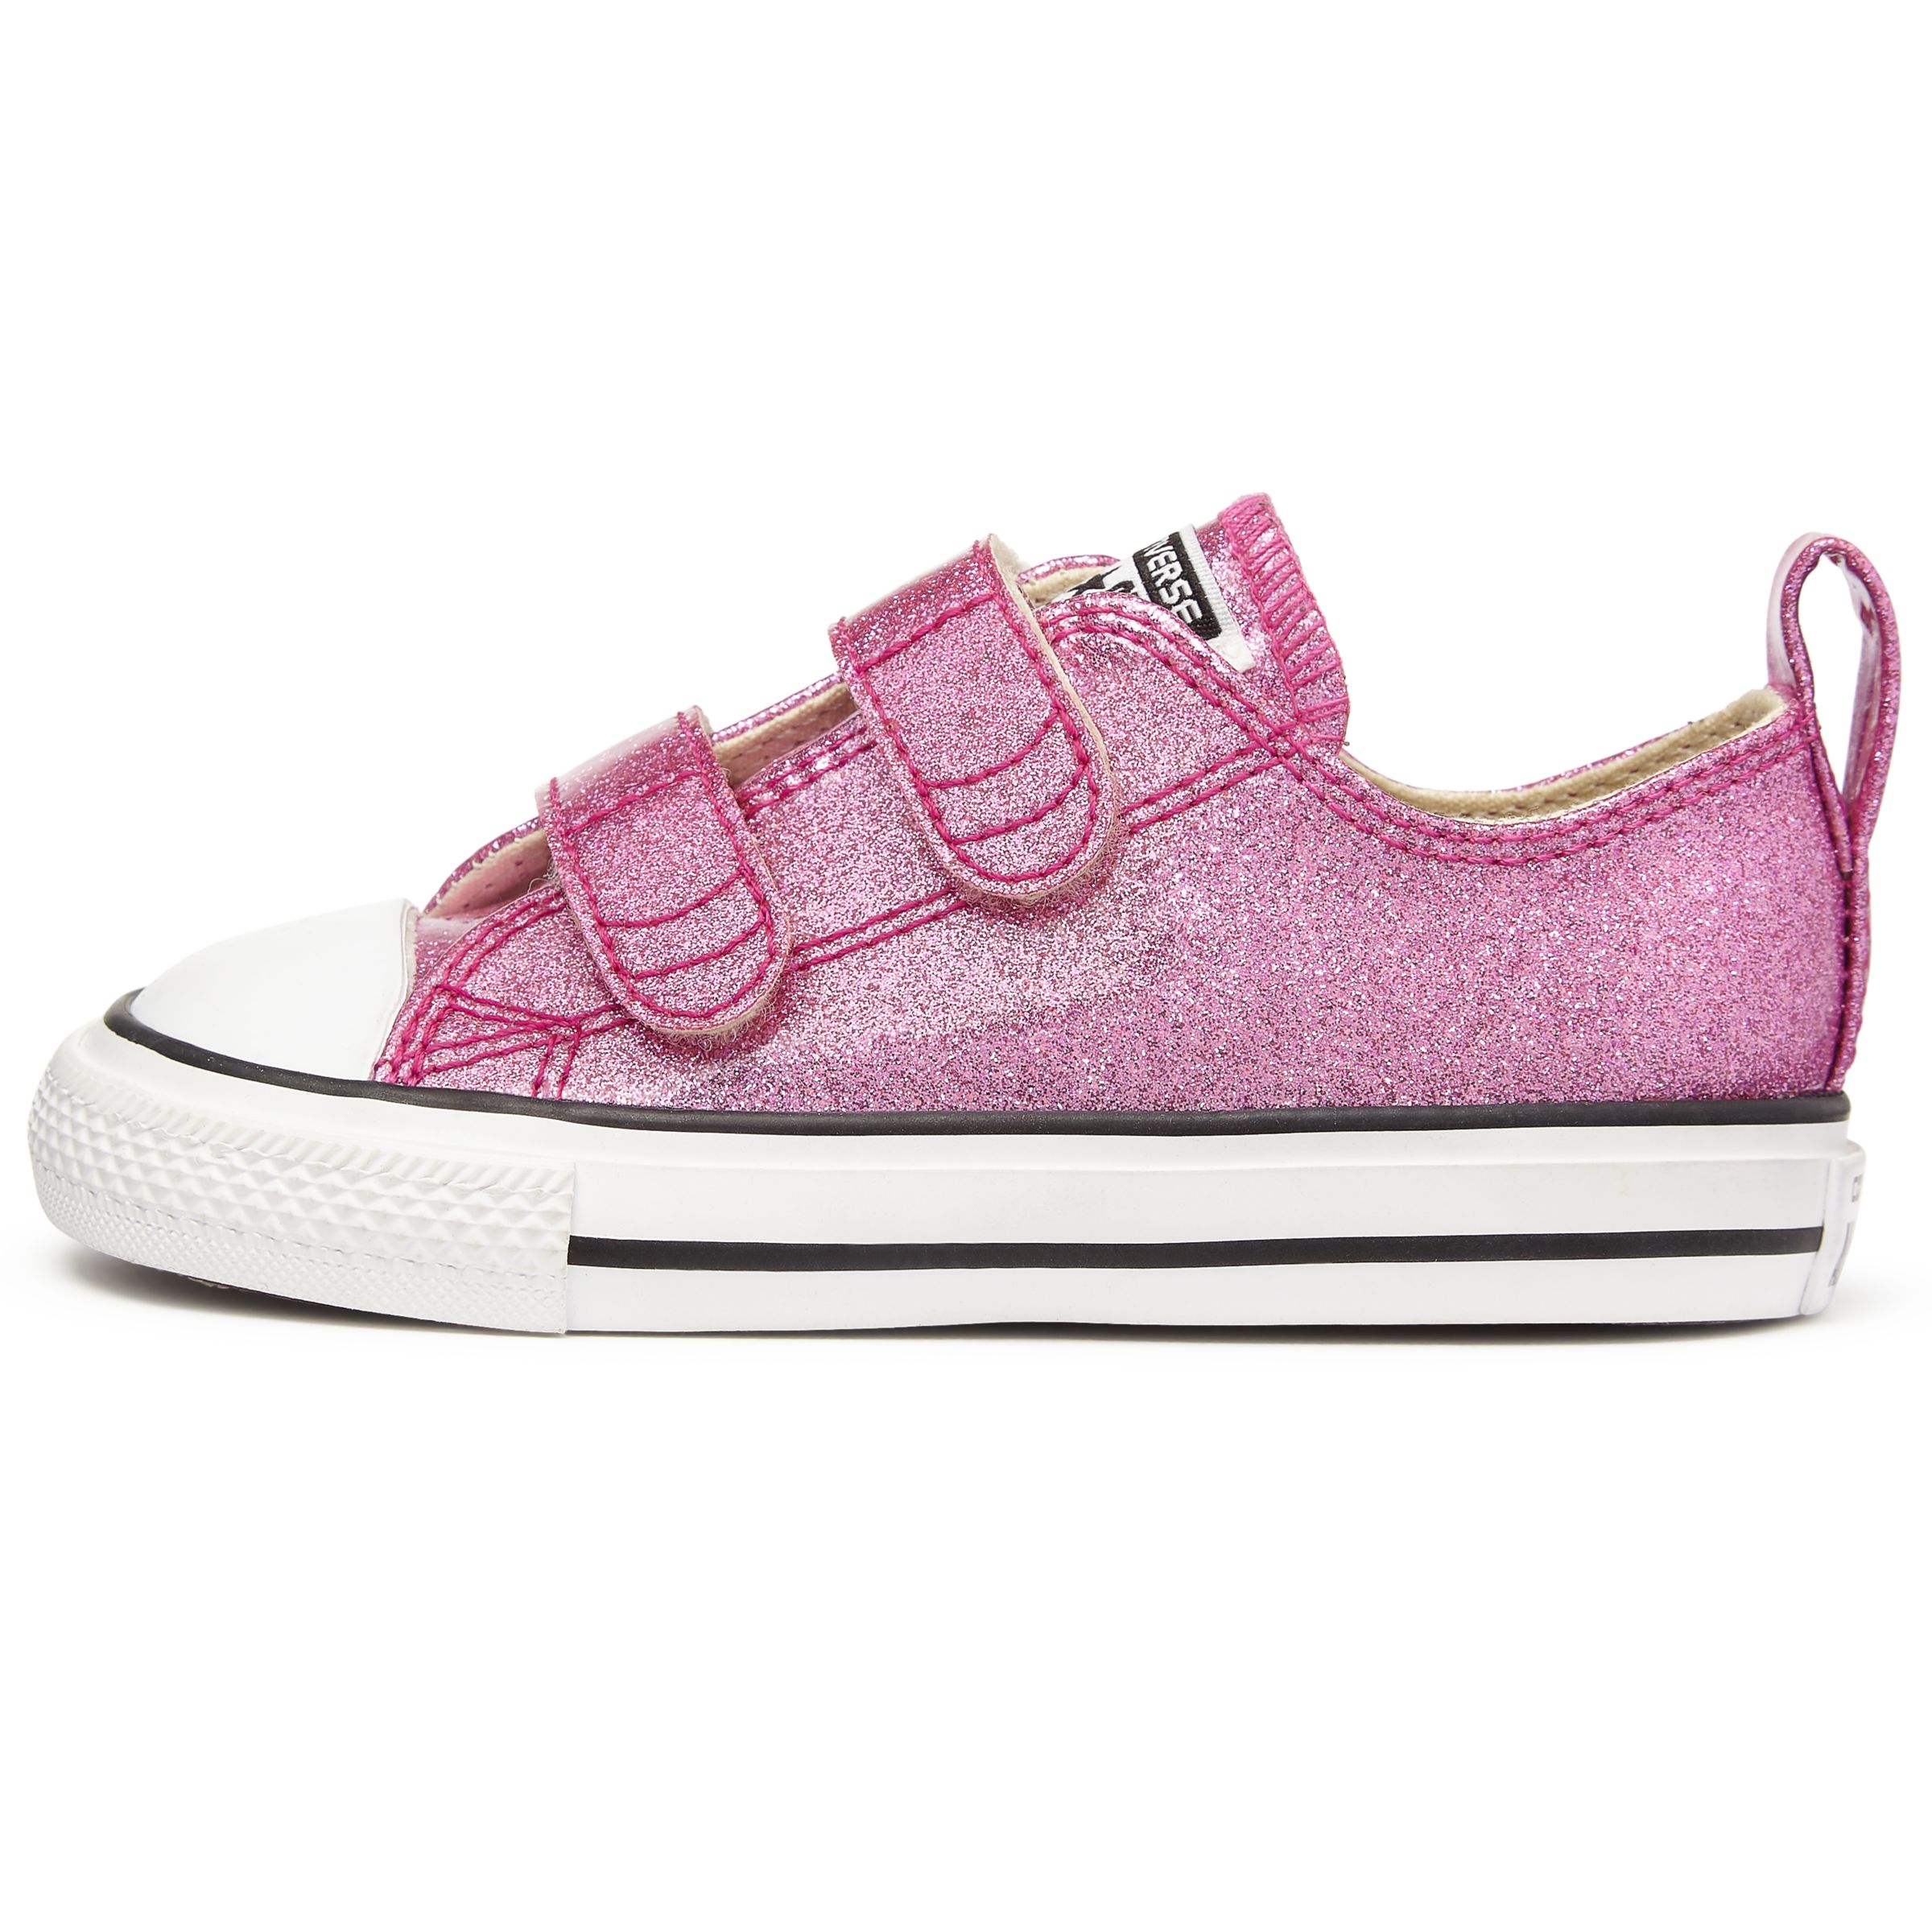 Converse Children's Chuck Taylor All Star Ox Rip-Tape Trainers, Pink Glitter